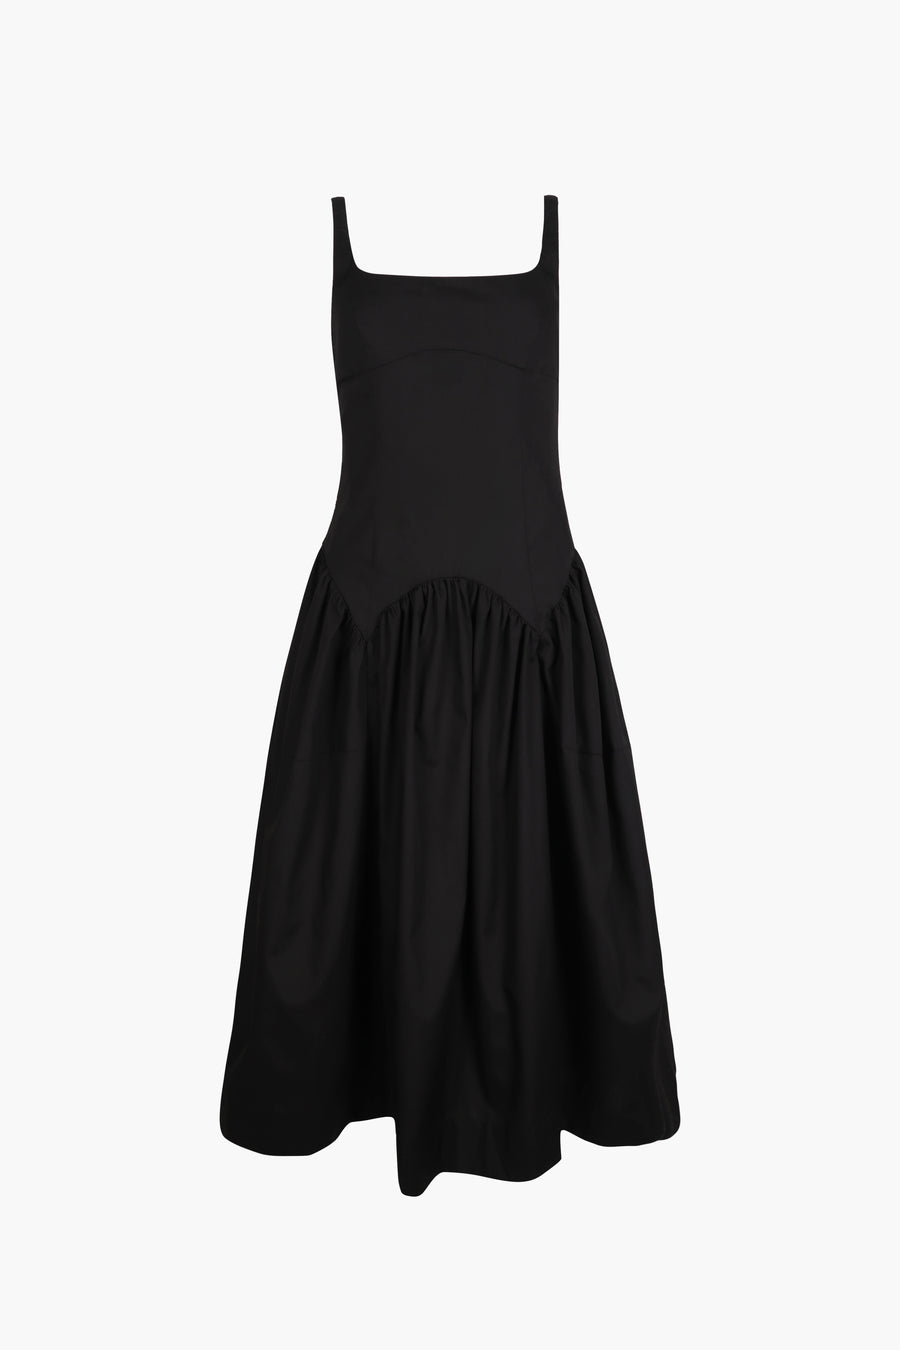 Sleeveless midi length dress in black with ties at back